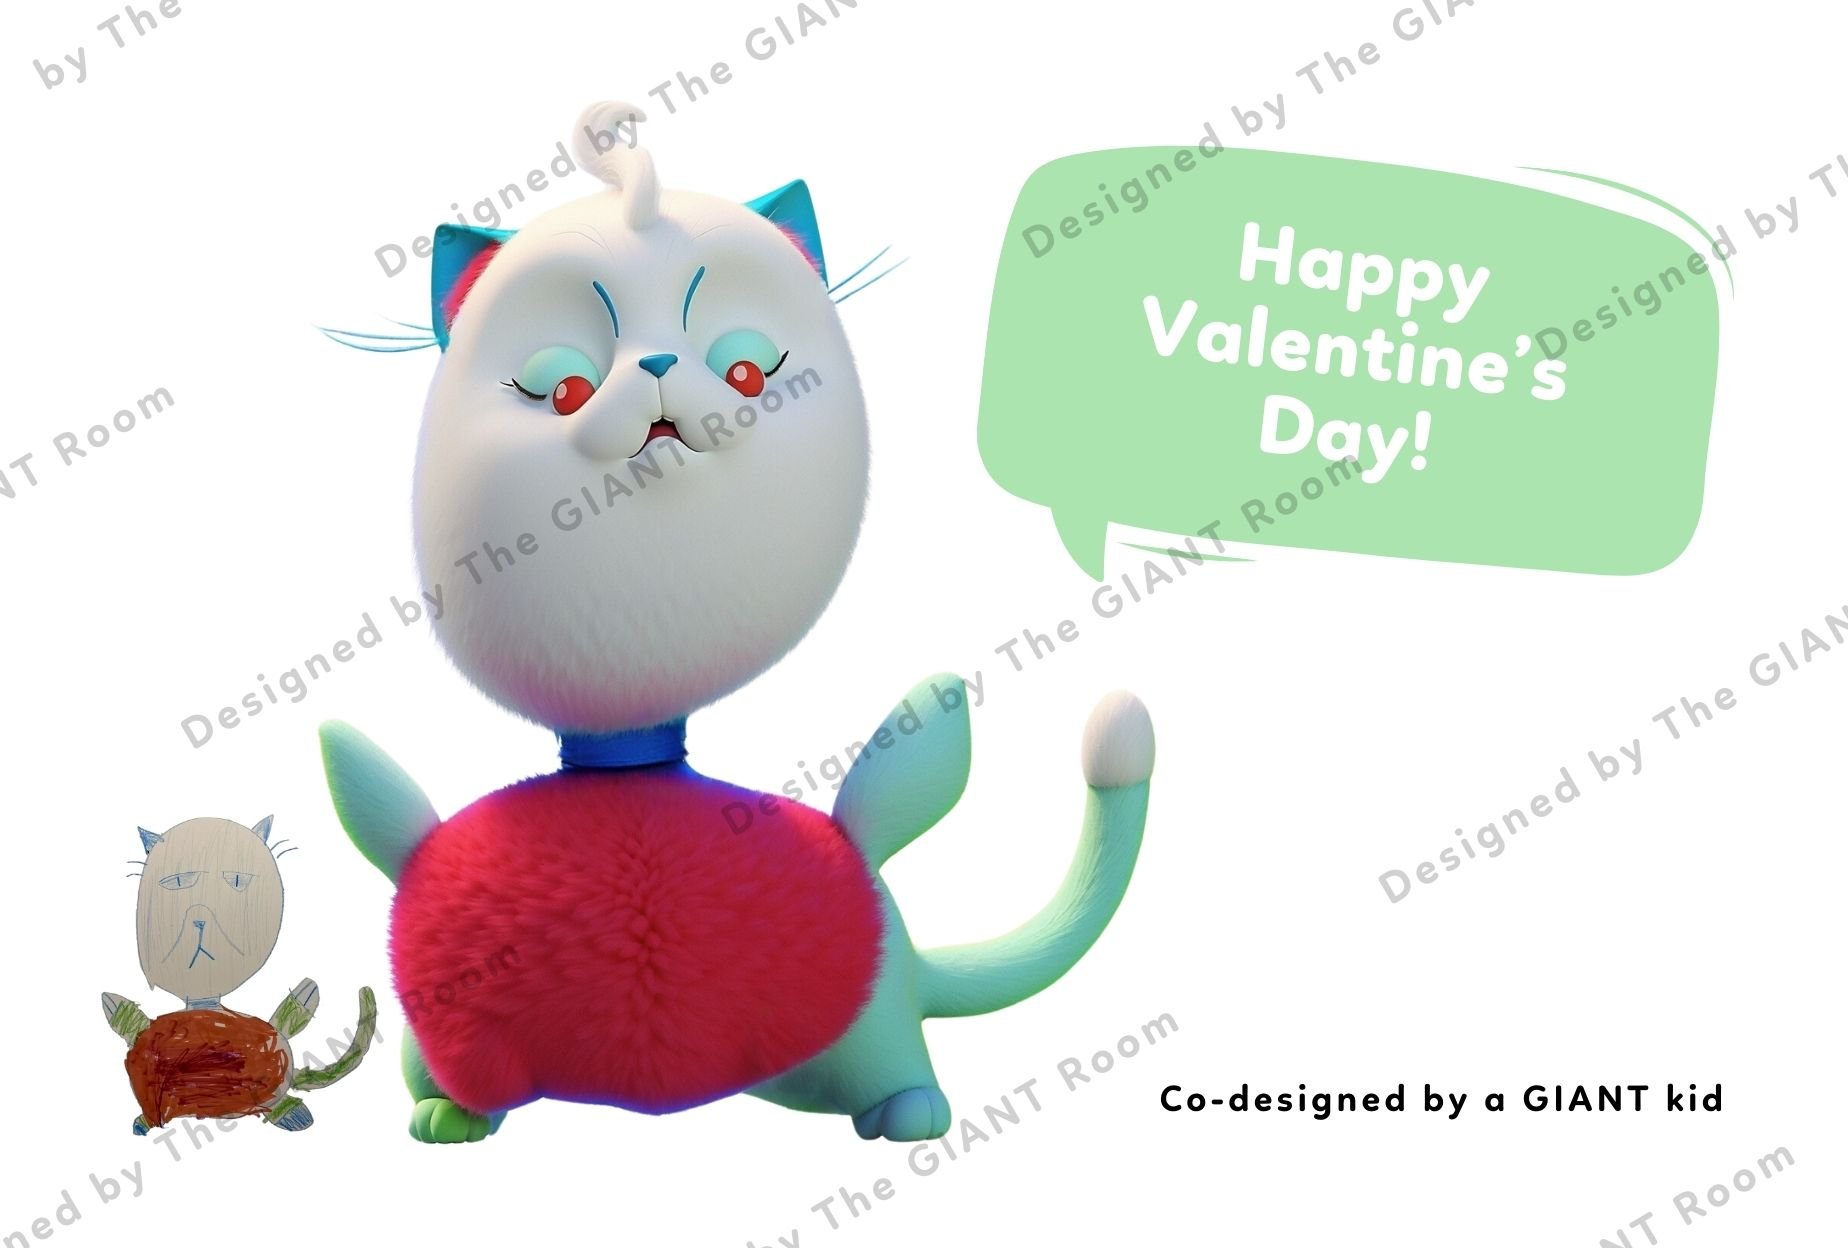 Kitty Clay - 1 - completed.jpg